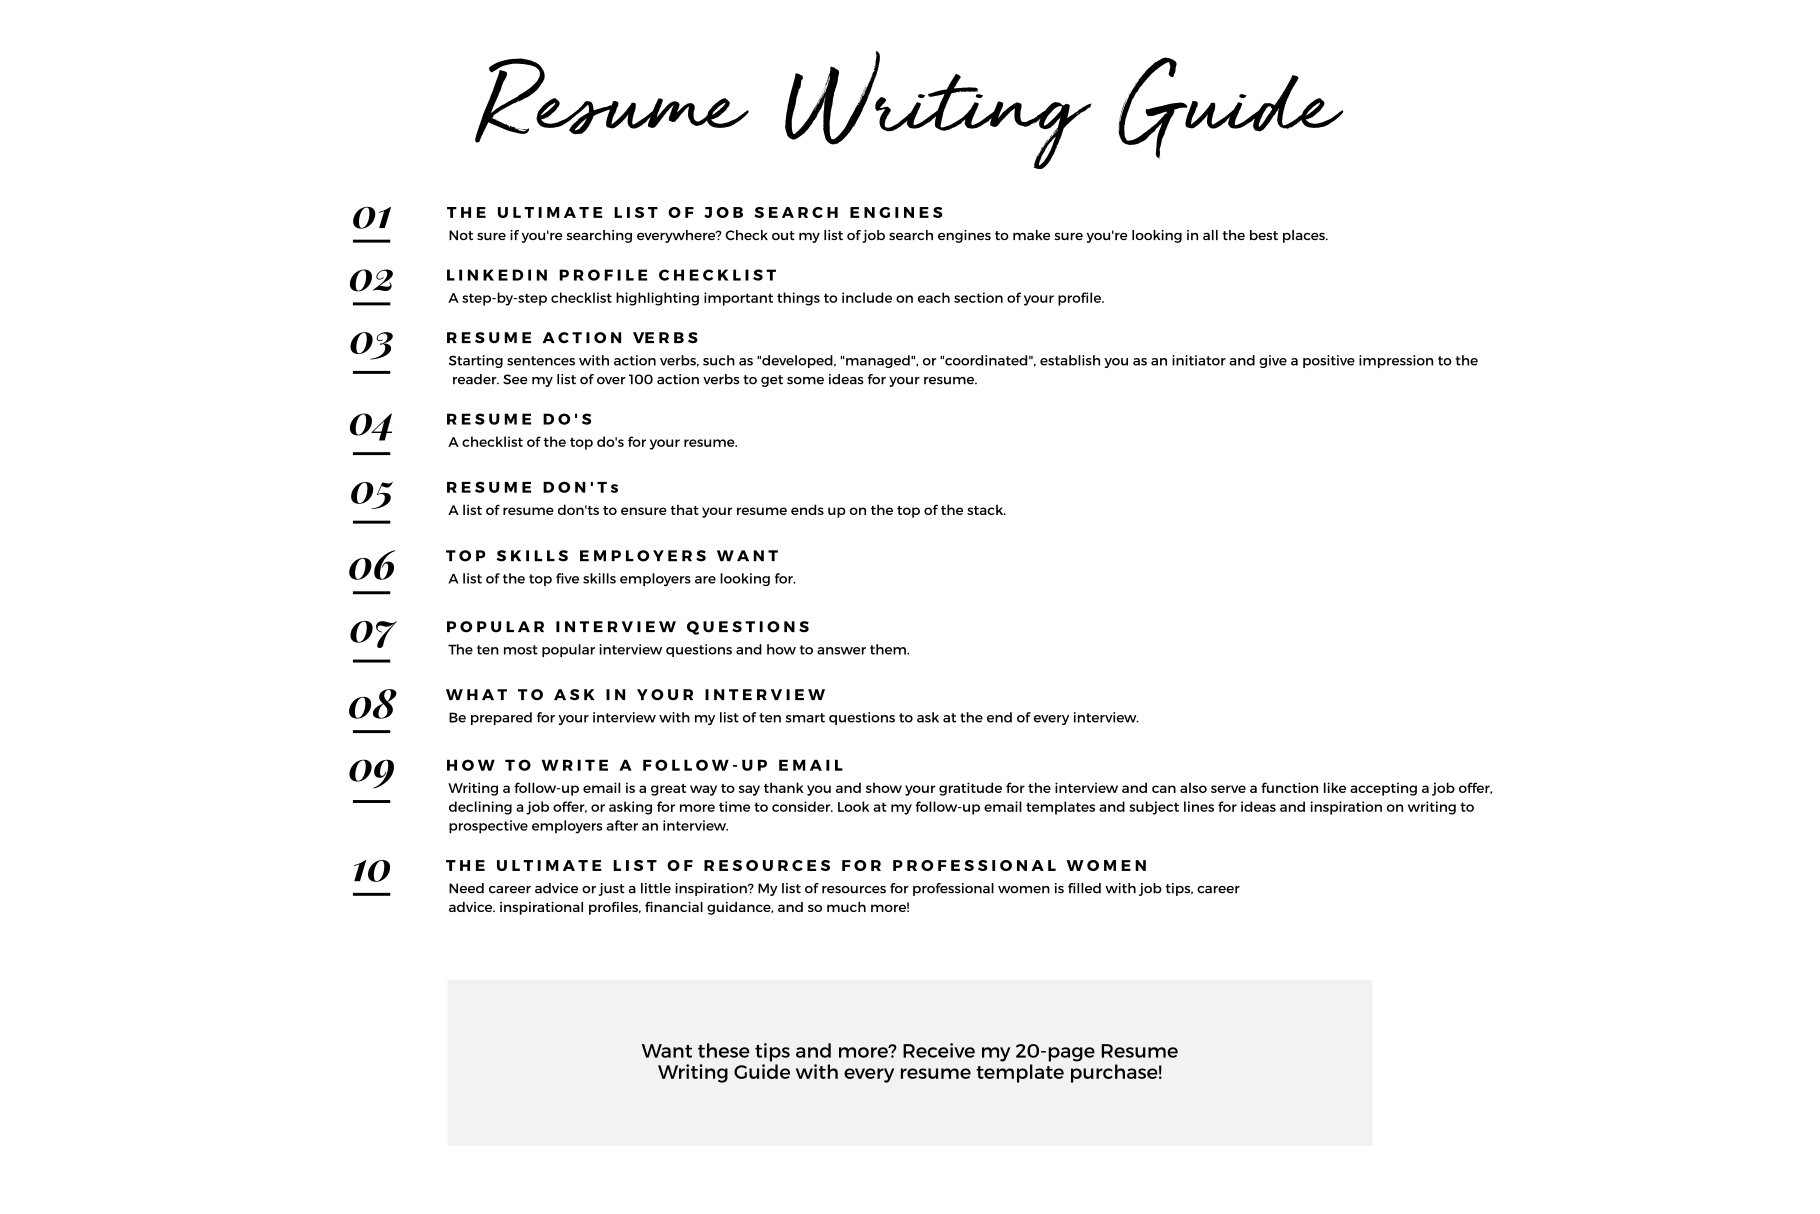 The resume writing guide is shown in black and white.